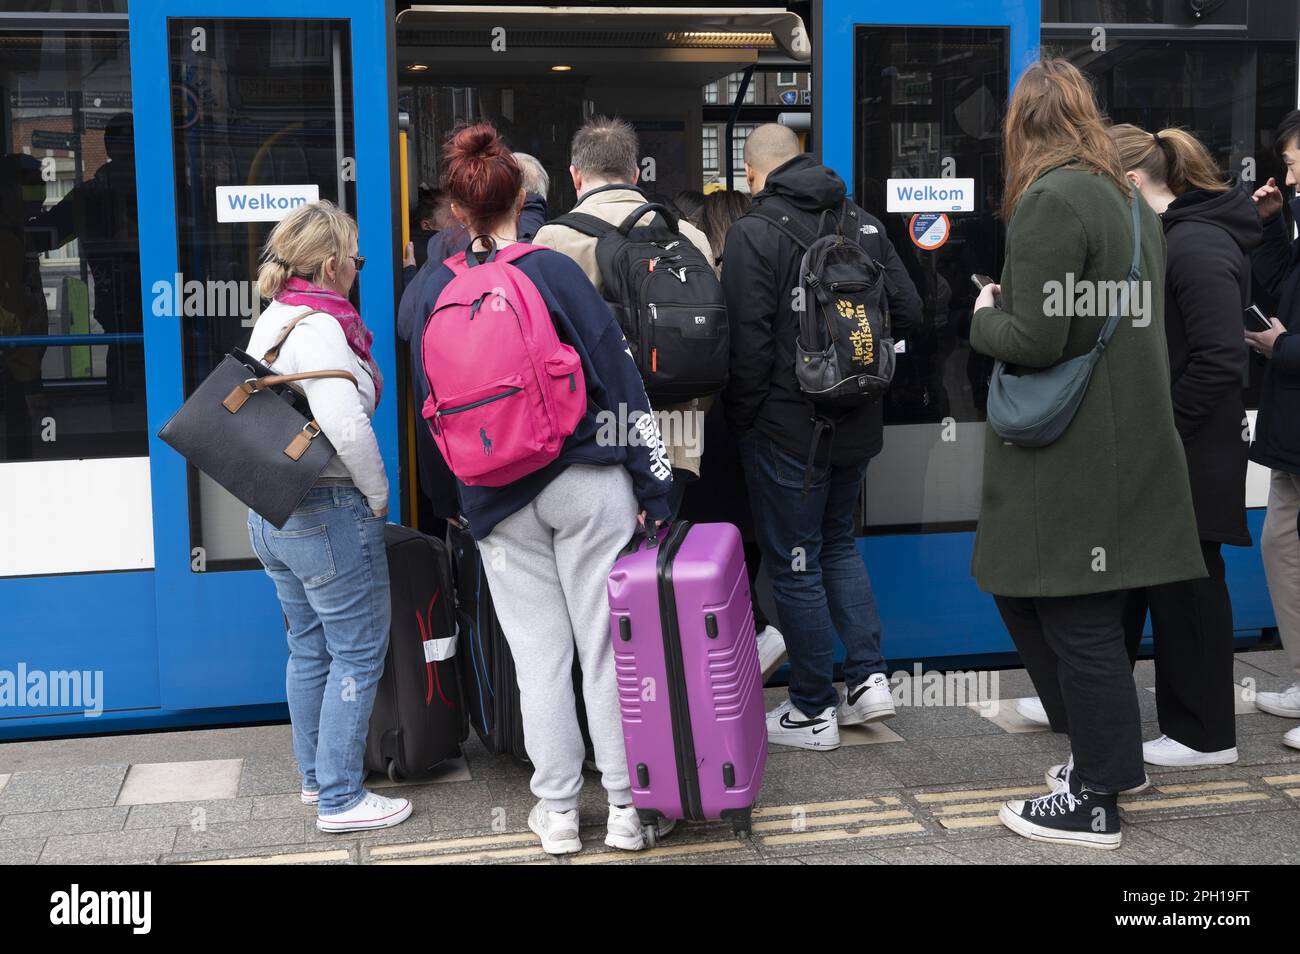 AMSTERDAM - Travelers board a tram in the center of Amsterdam. Public transport in the capital is being overhauled because the number of travelers has decreased due to the corona crisis. ANP EVERT ELZINGA netherlands out - belgium out Stock Photo